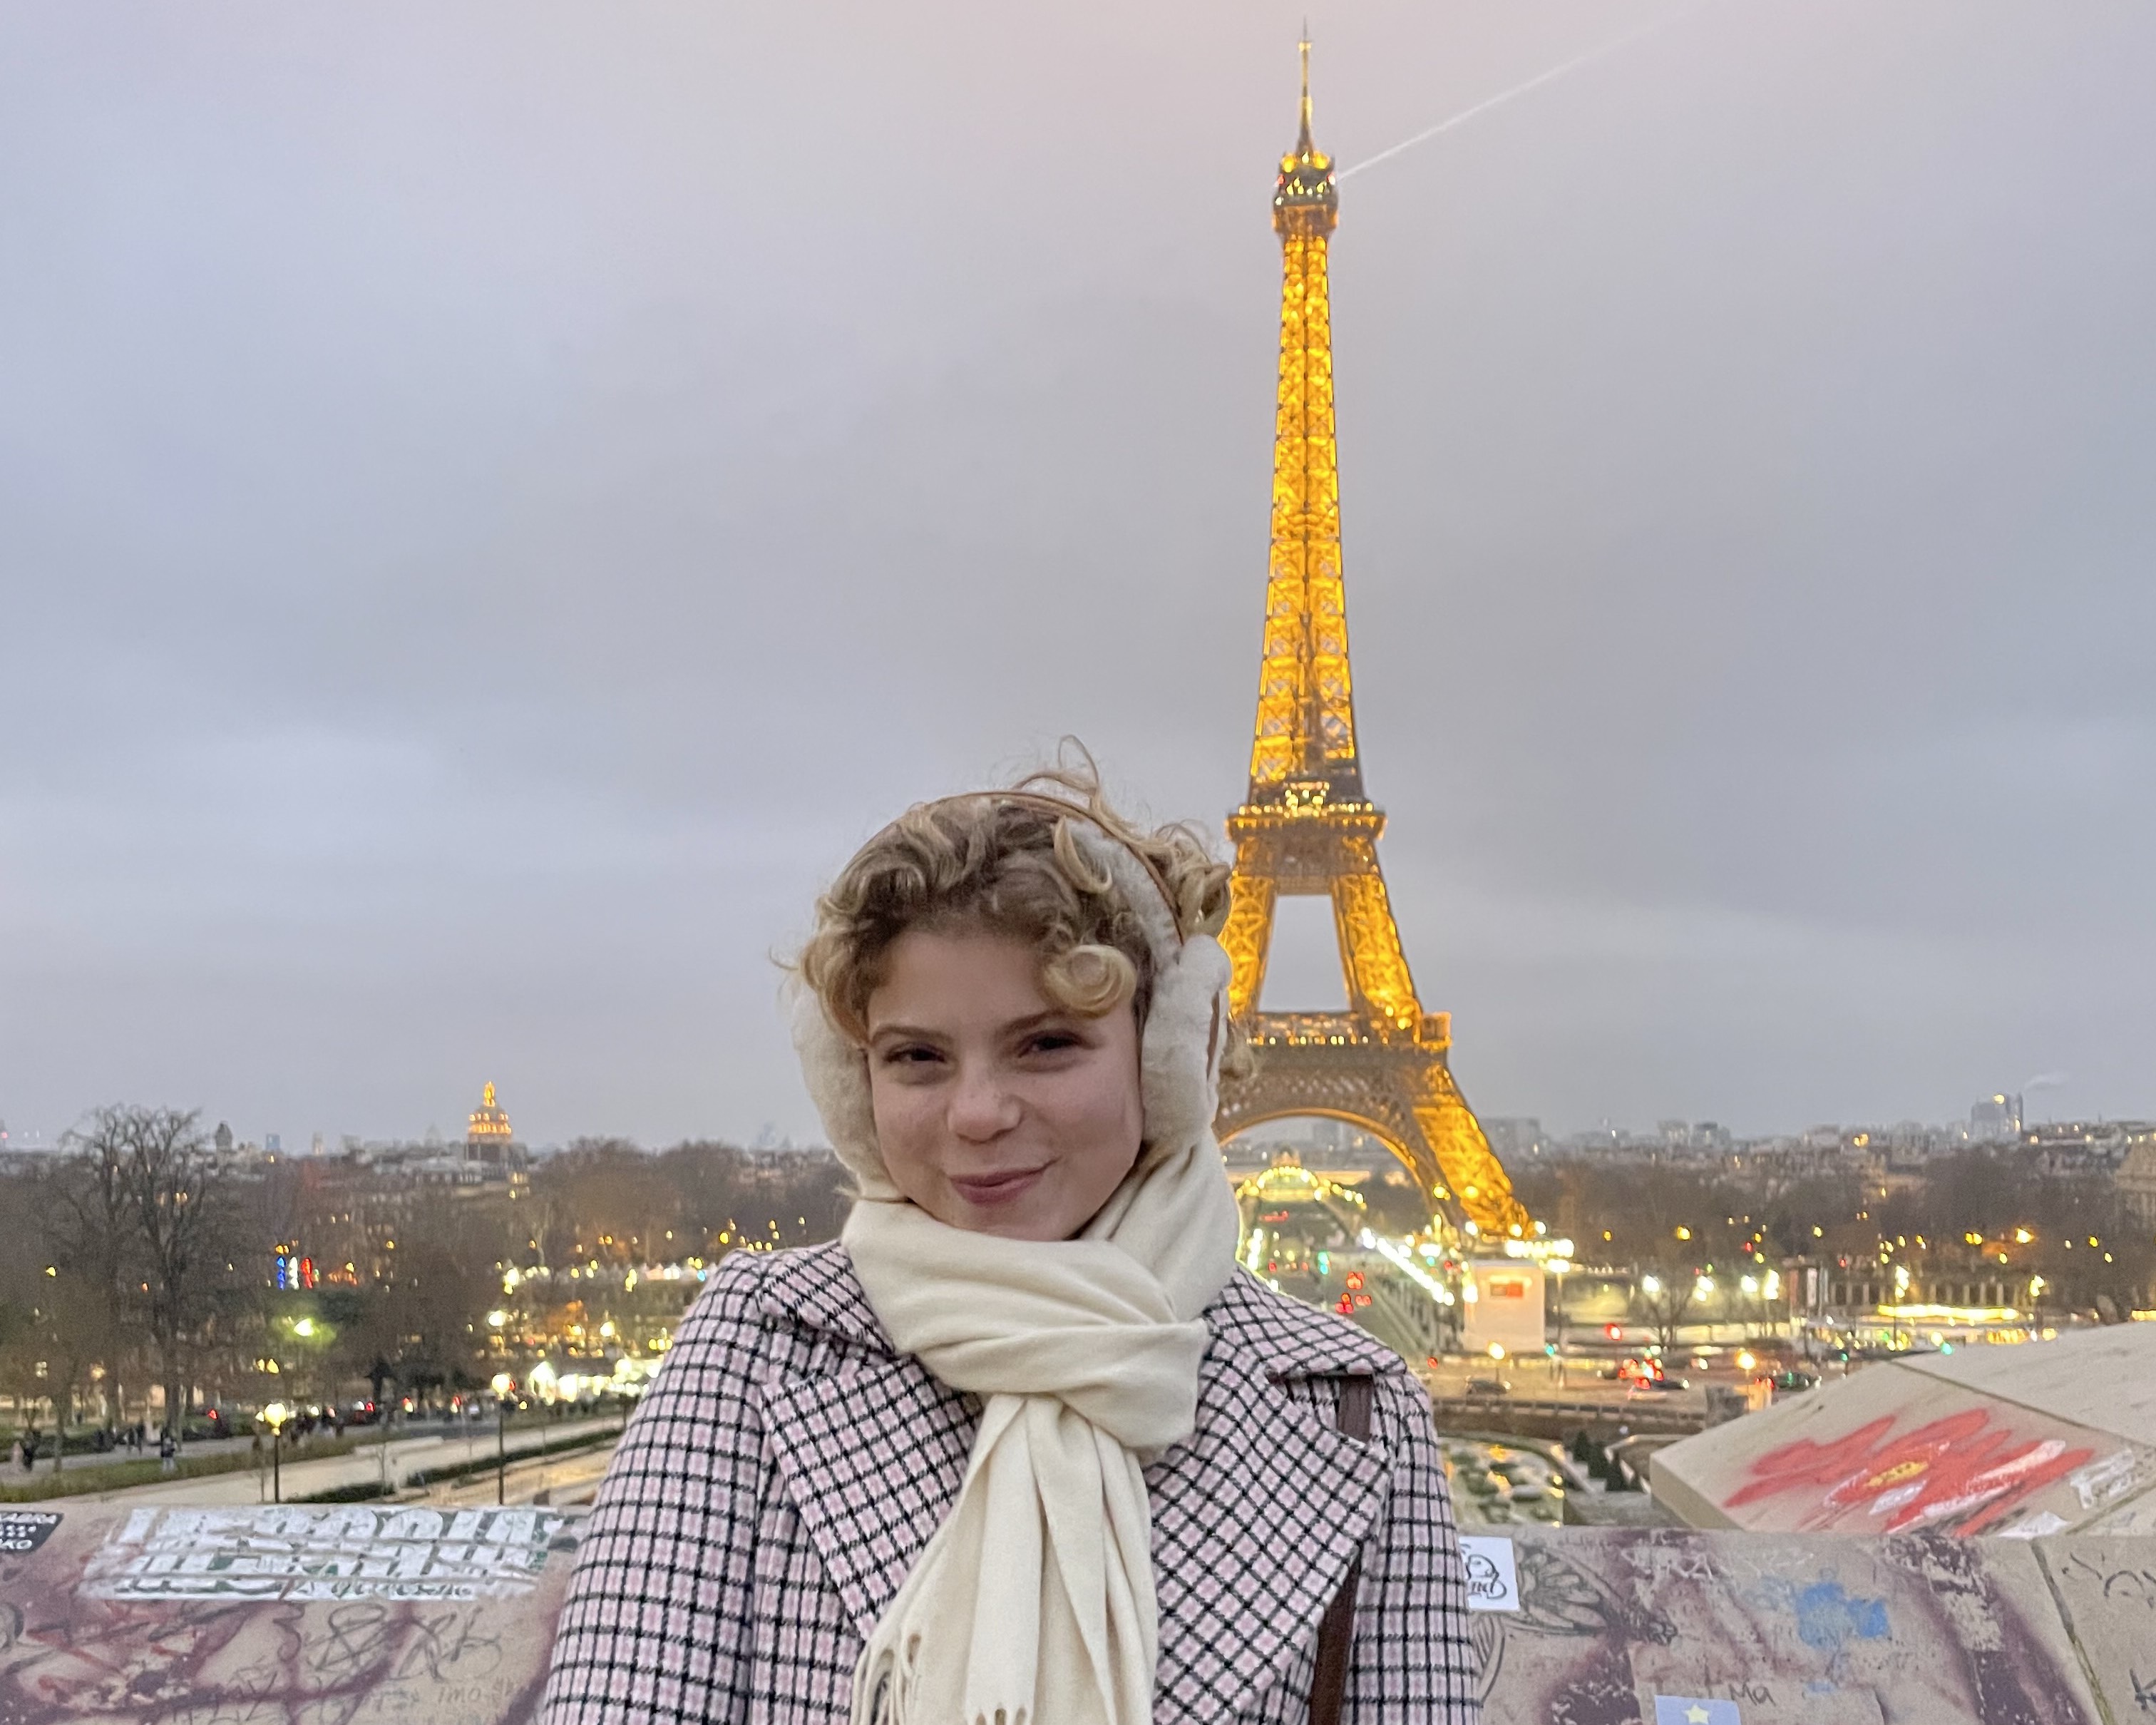 Liana Secondino standing in front of the Eiffel Tower in paris